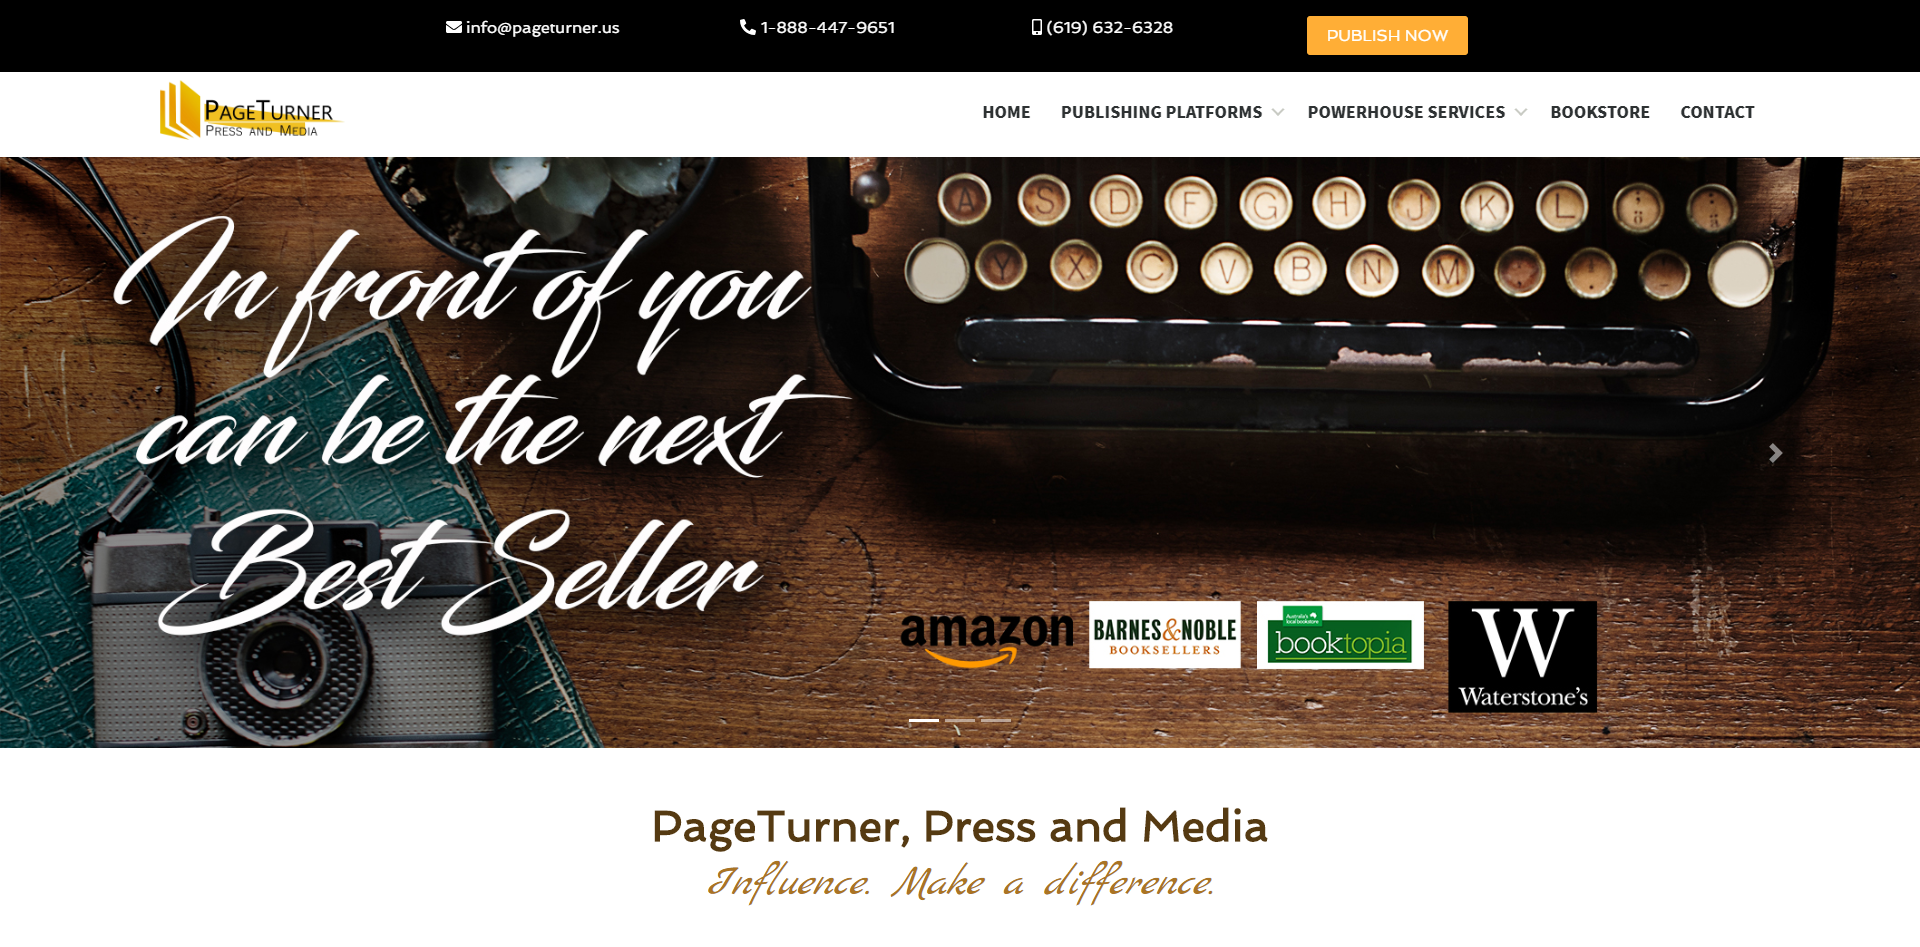 PageTurner, Press and Media